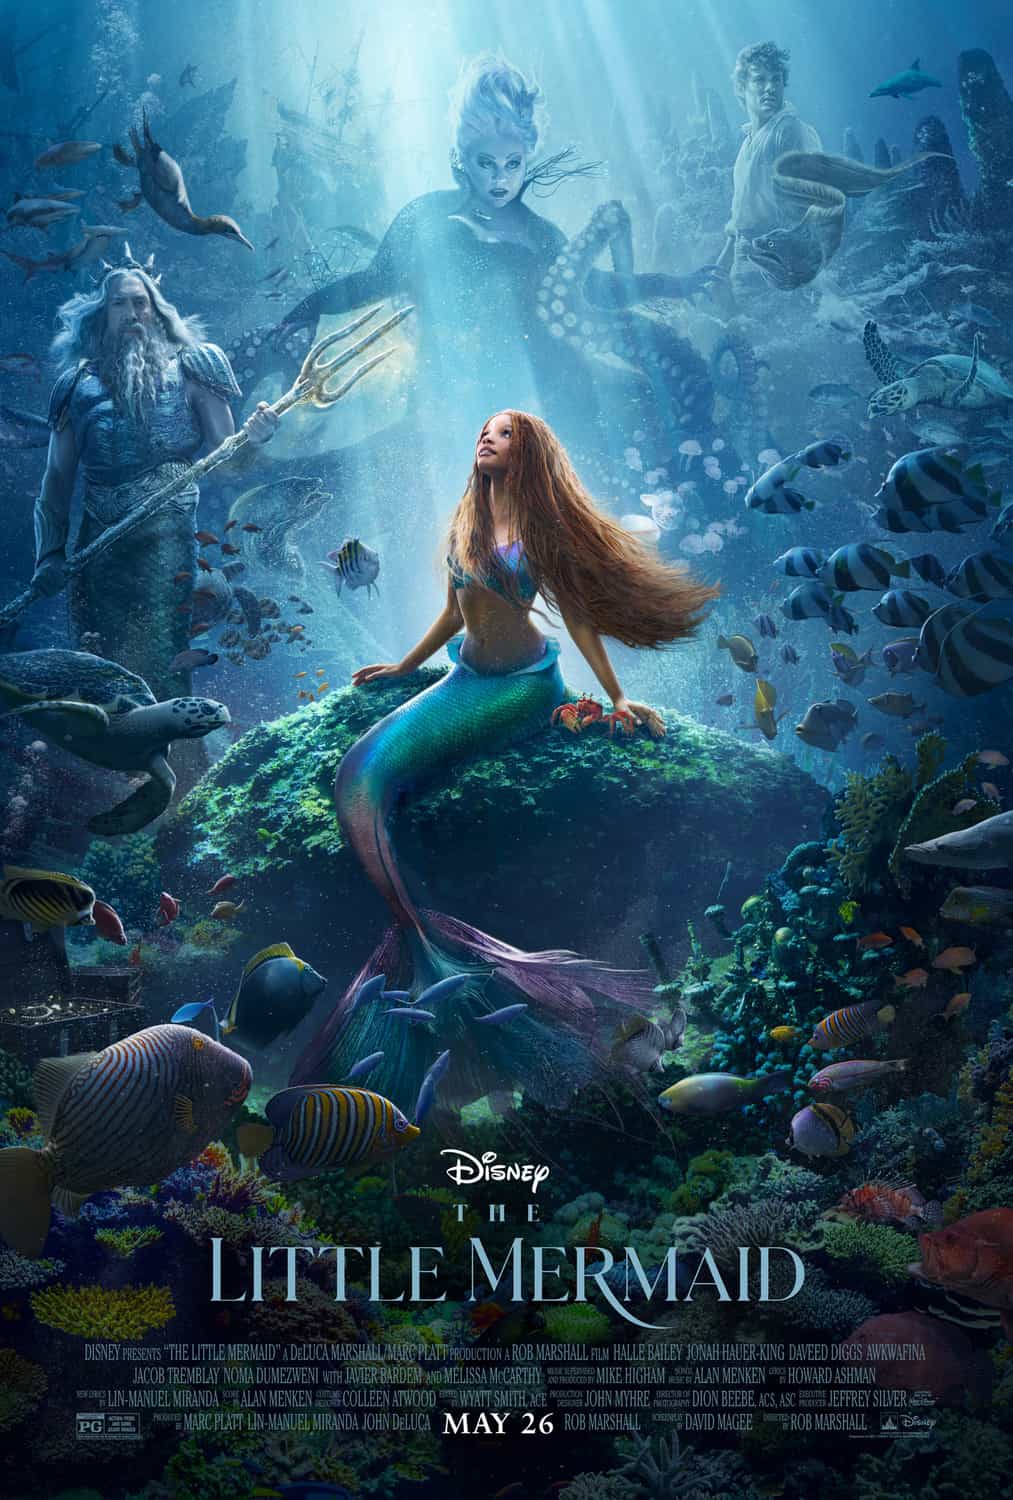 Check out the new trailer and poster for upcoming movie The Little Mermaid which stars Halle Bailey and Jonah Hauer-King - movie UK release date 26th May 2023 #thelittlemermaid